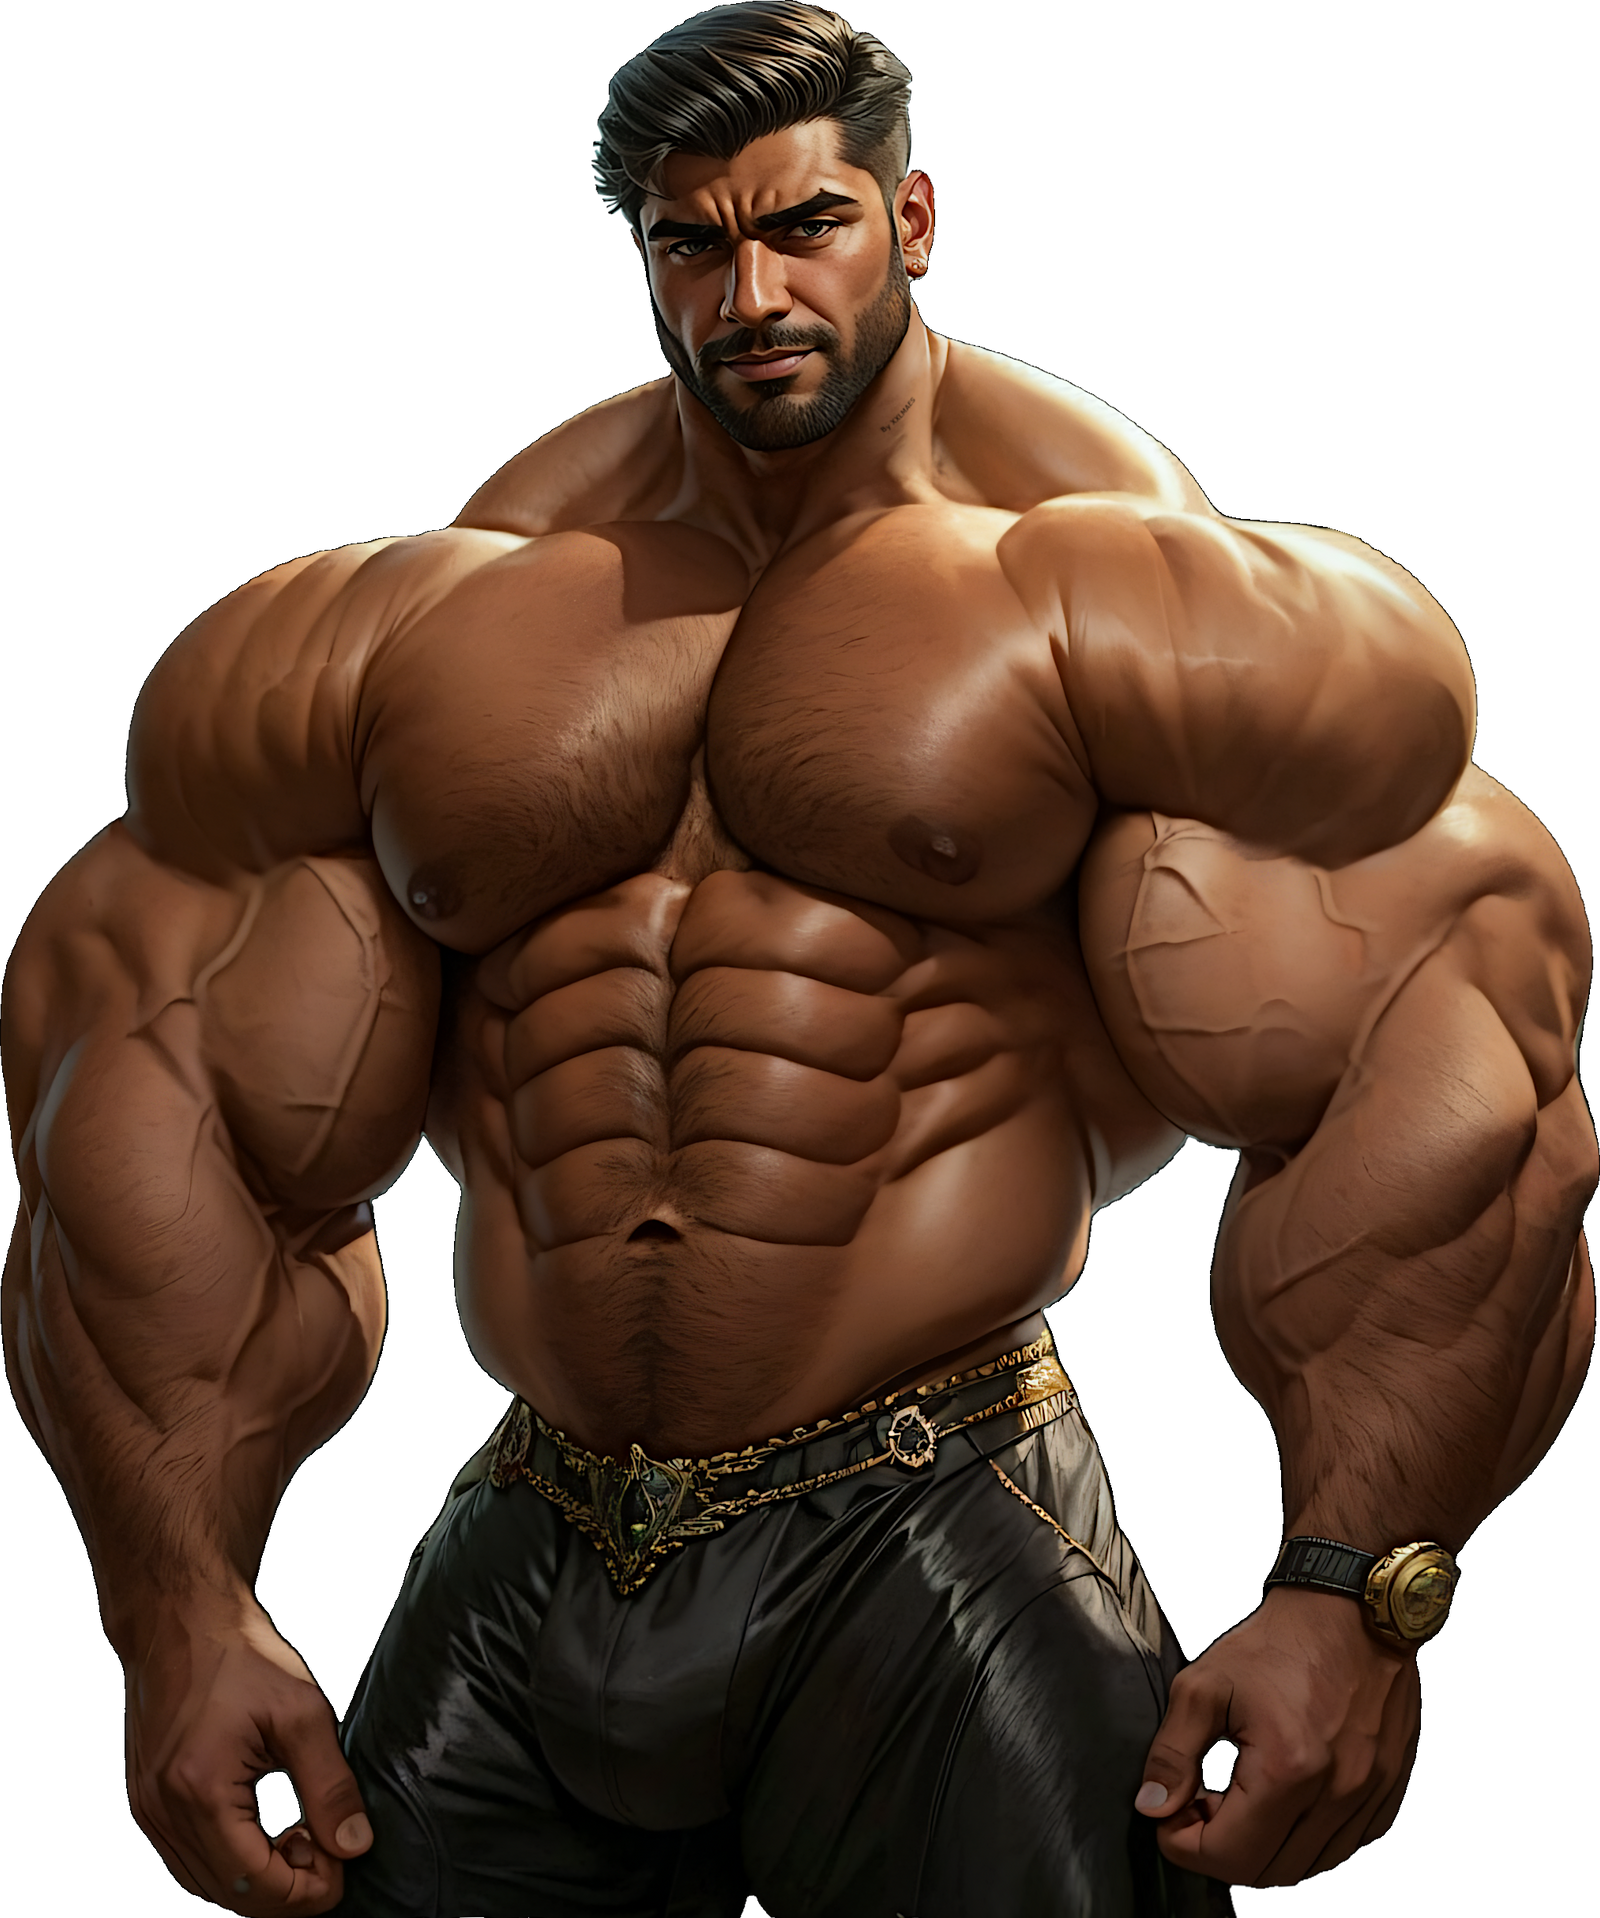 Muscle Man PNG Image  Muscle men, Muscle, Man